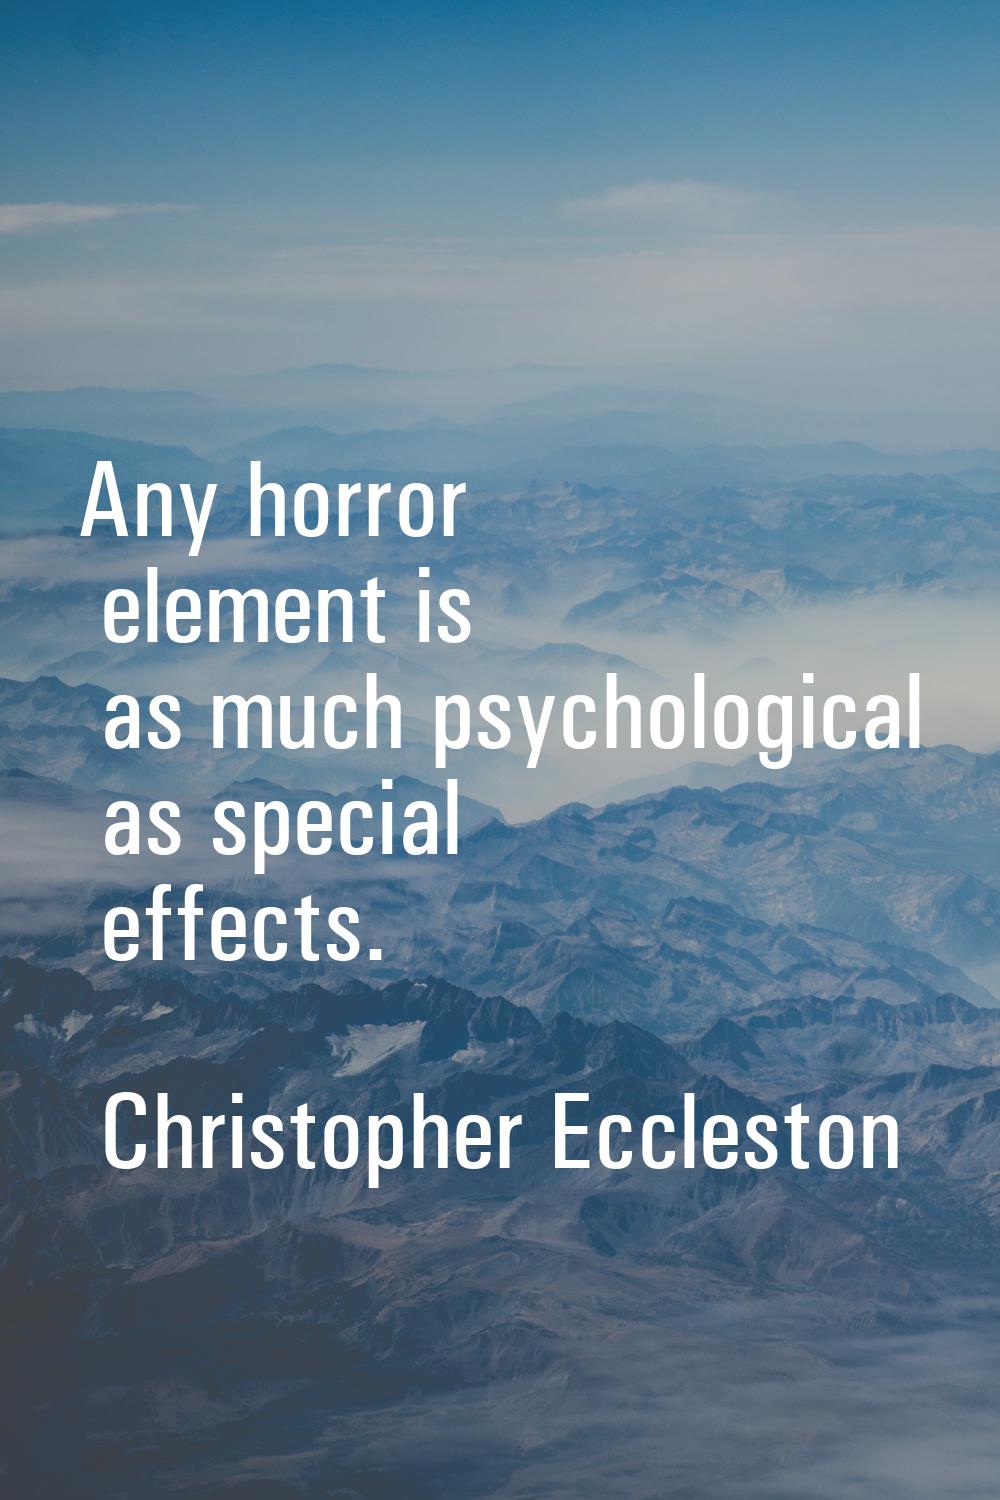 Any horror element is as much psychological as special effects.